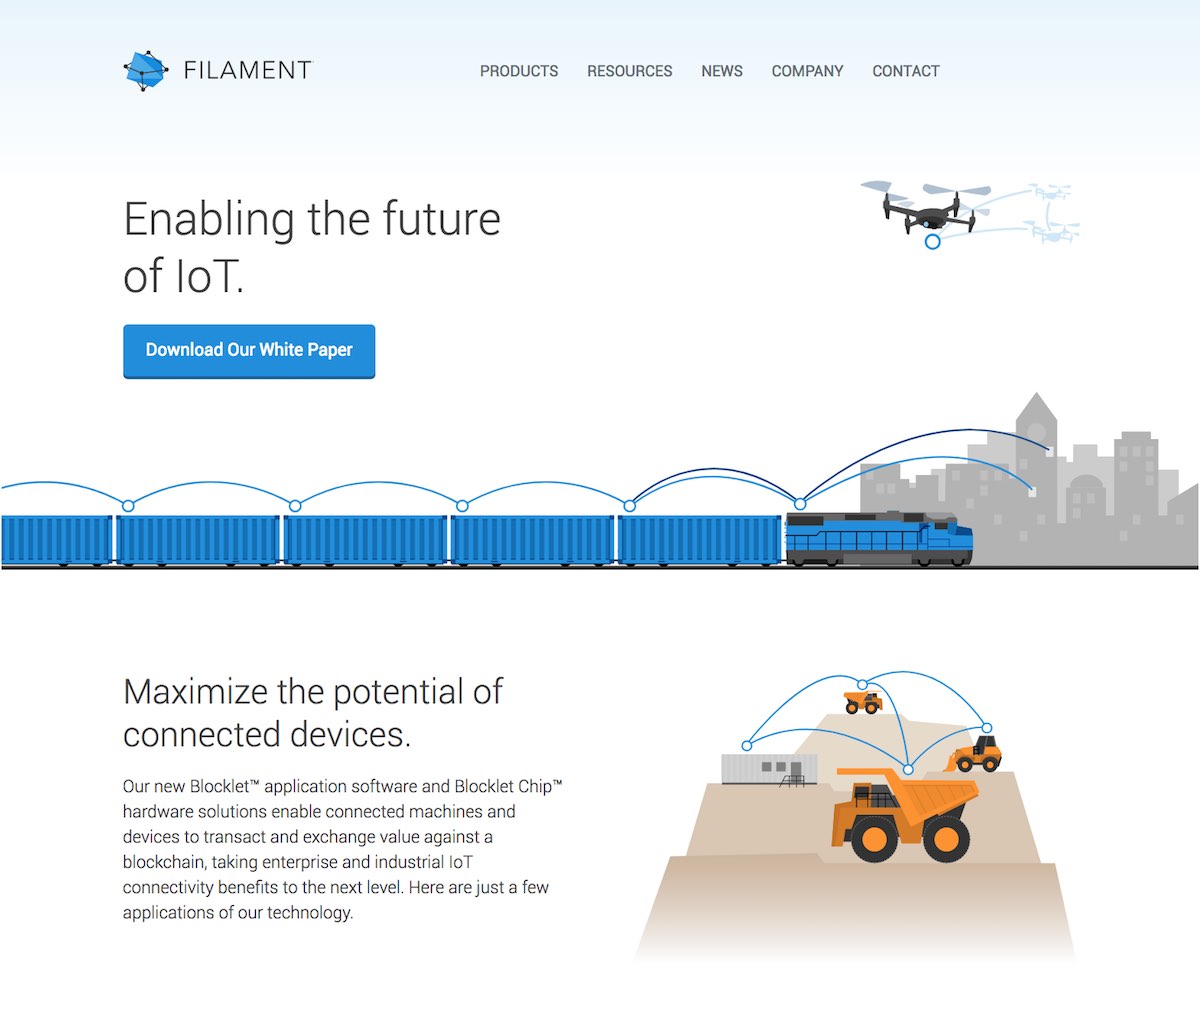 Brand identity for Filament (previously known as Pinoccio) is the best tool on the market for industrial sensor data collection